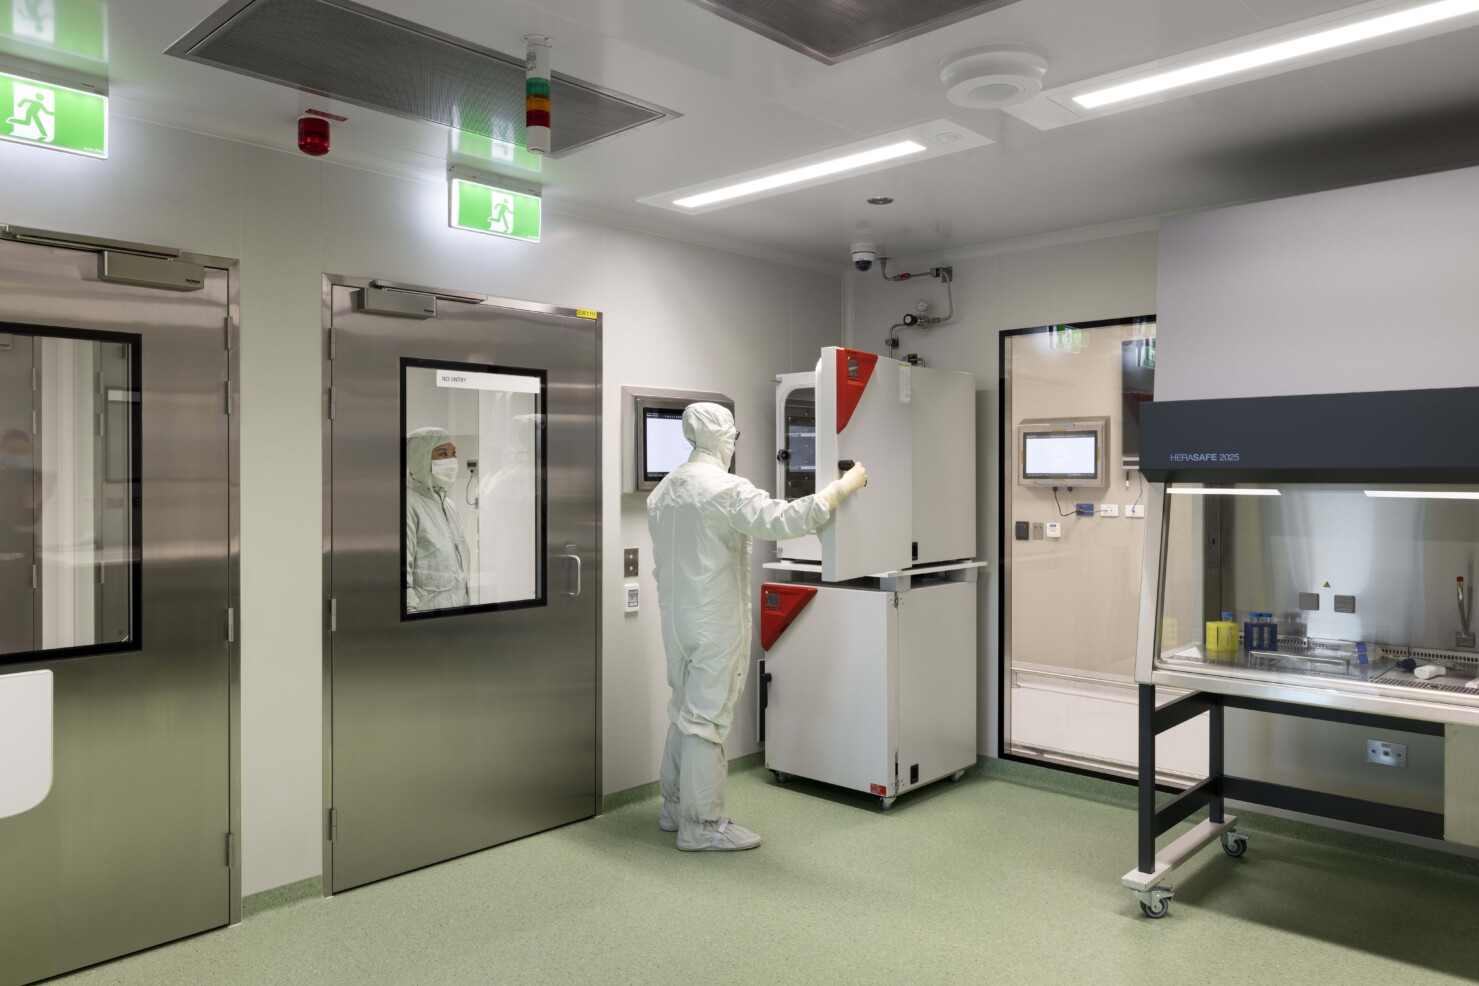 a cleanroom with appliances and green floor